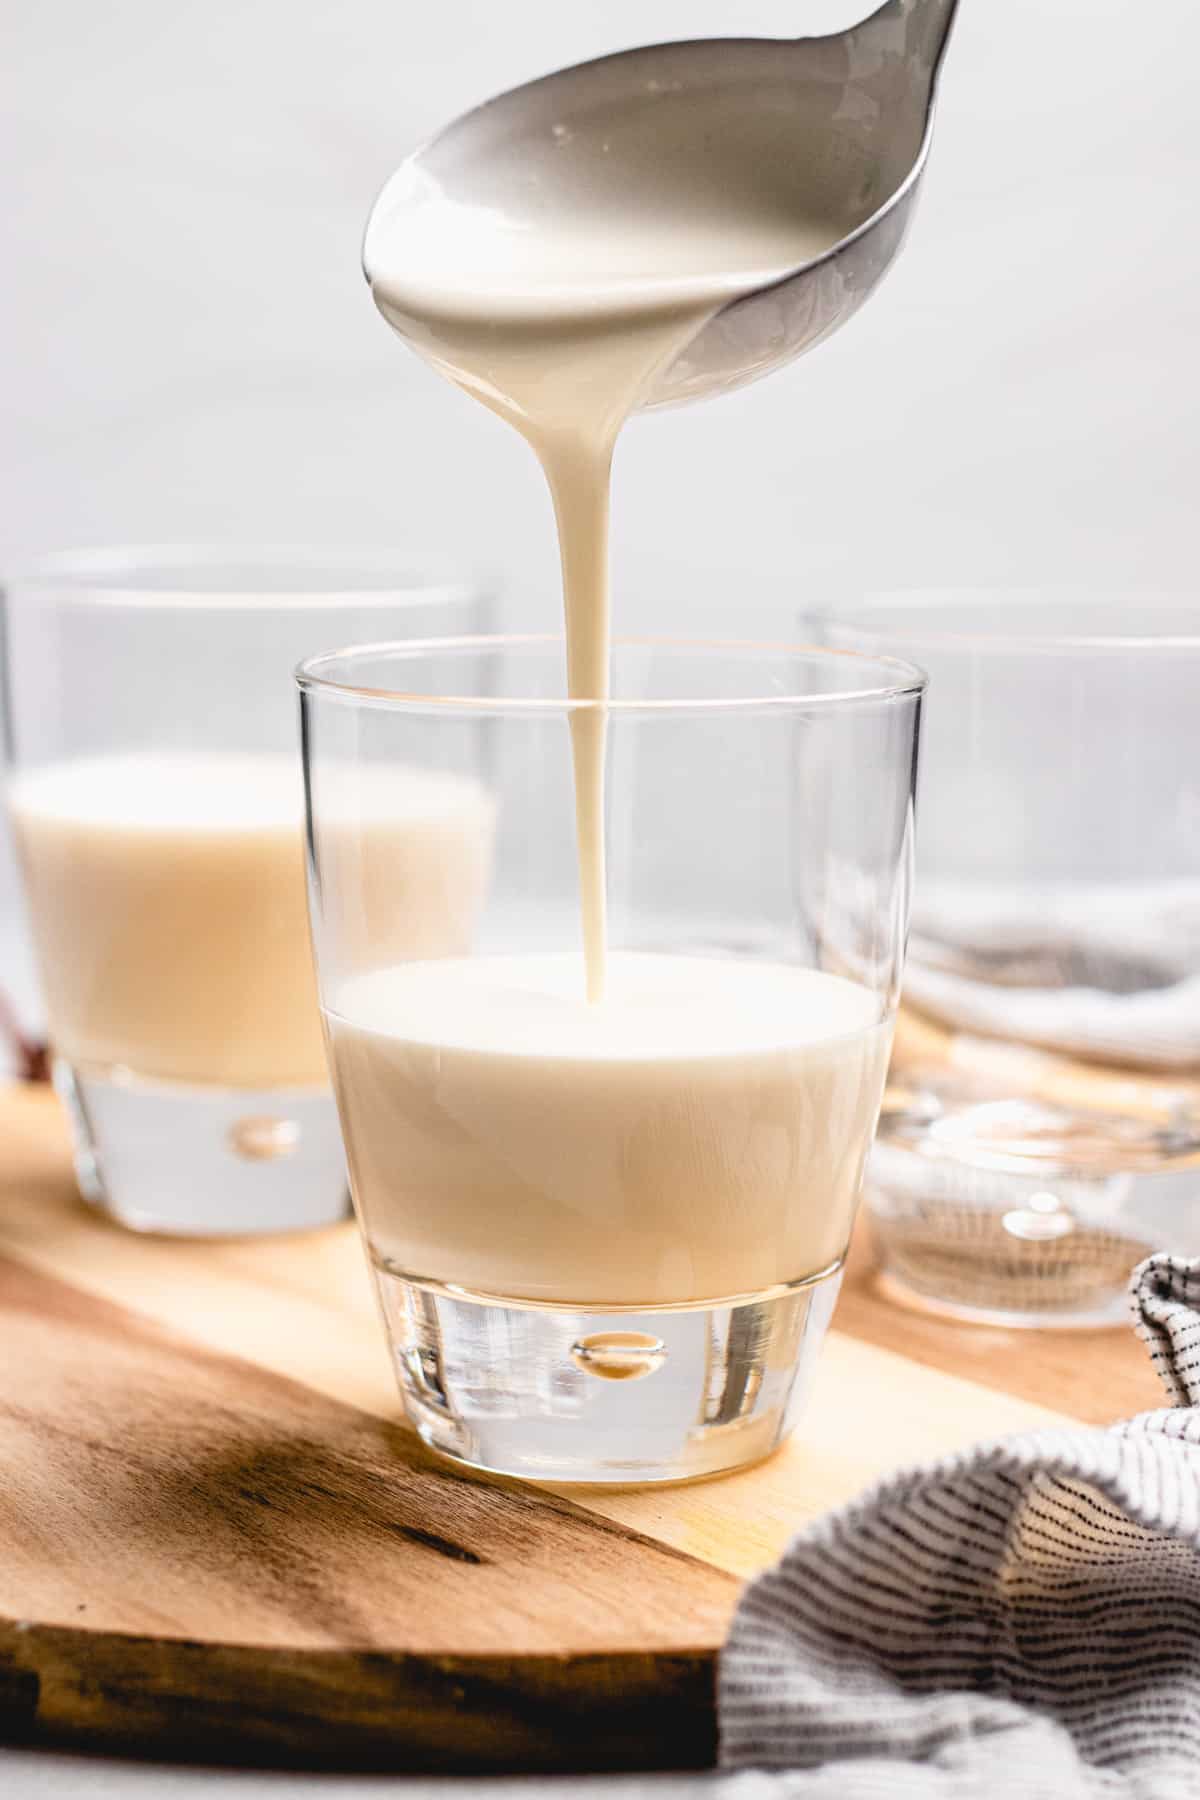 Pouring panna cotta in a glass on a wooden cutting board.